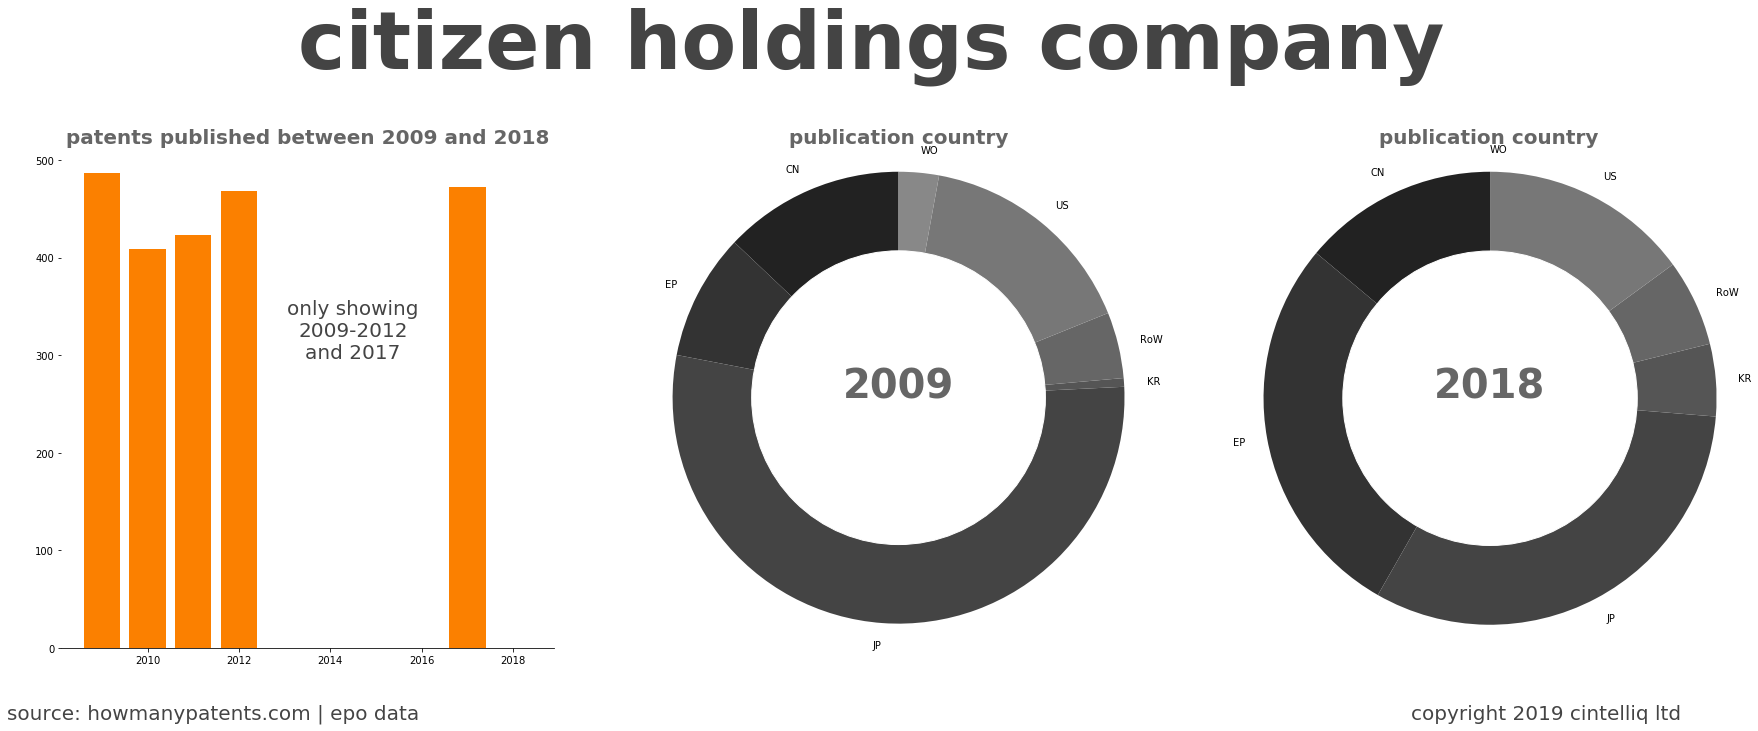 summary of patents for Citizen Holdings Company